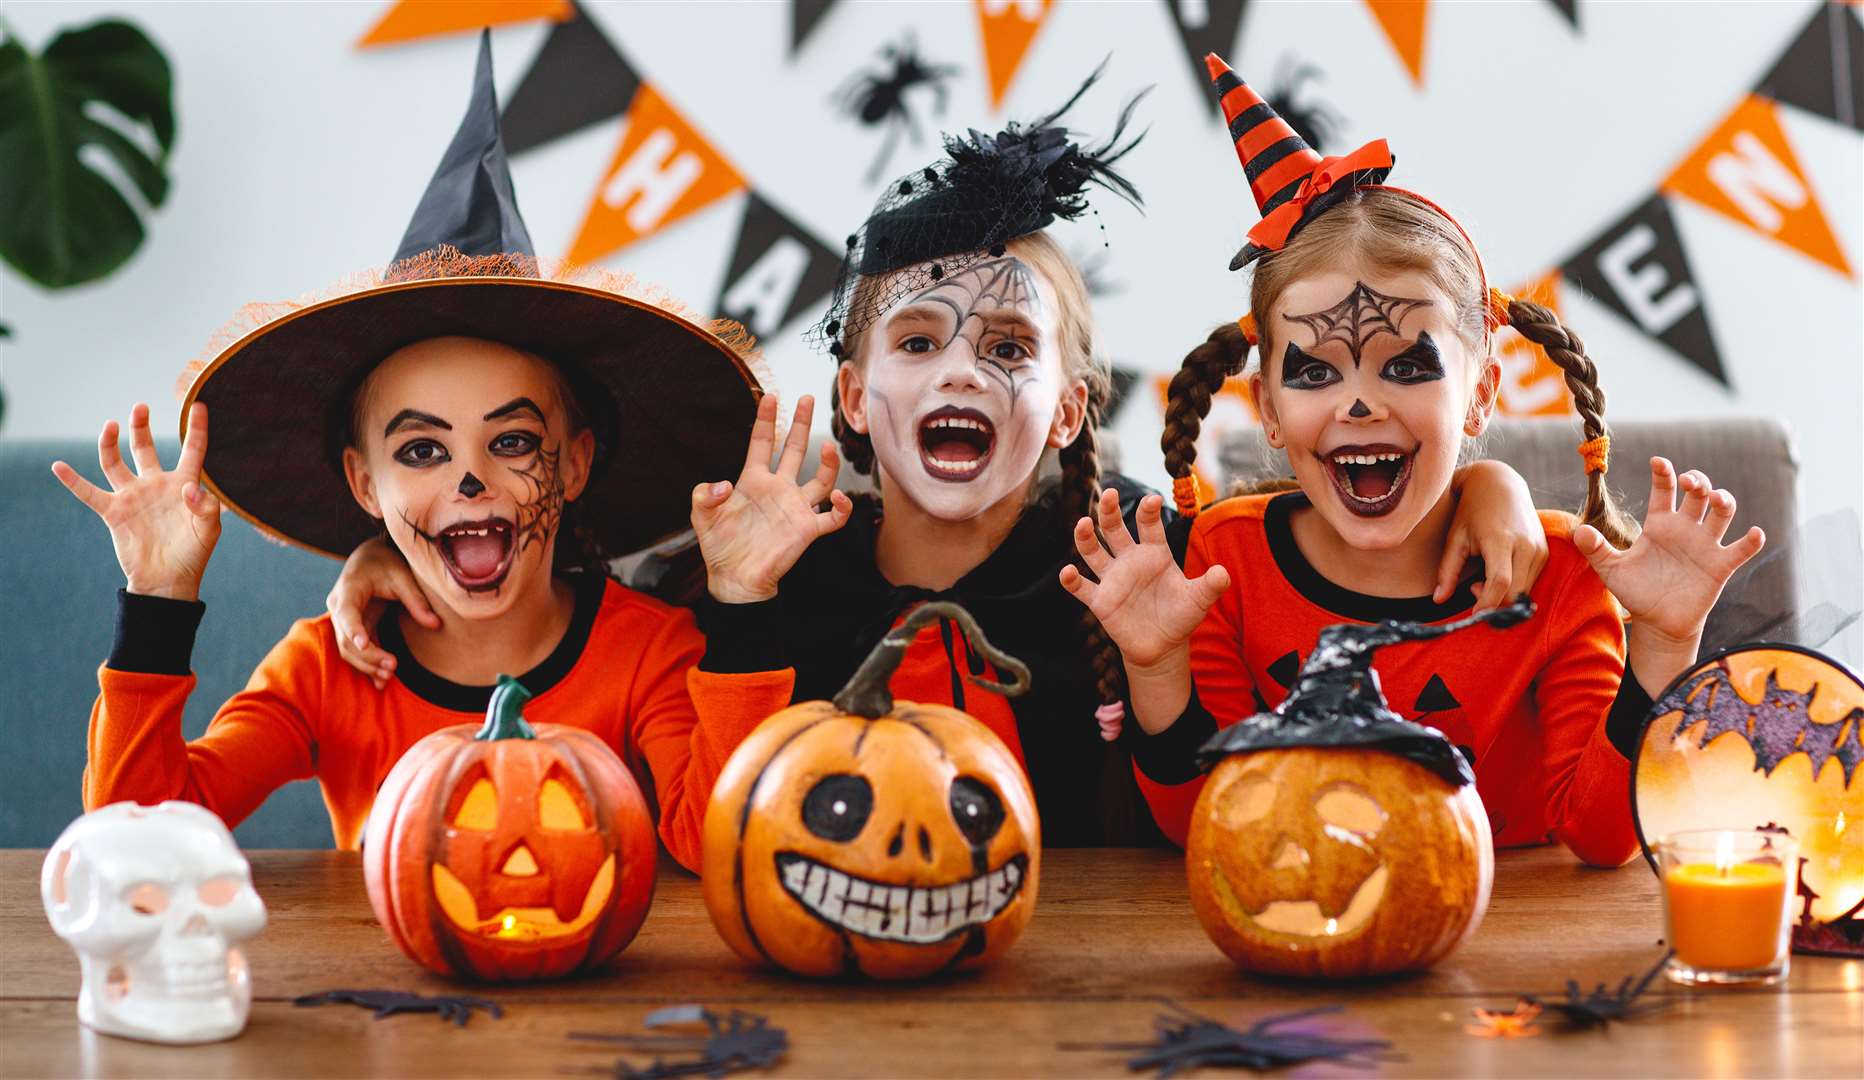 Parents are being urged to help children stay safe this Halloween.